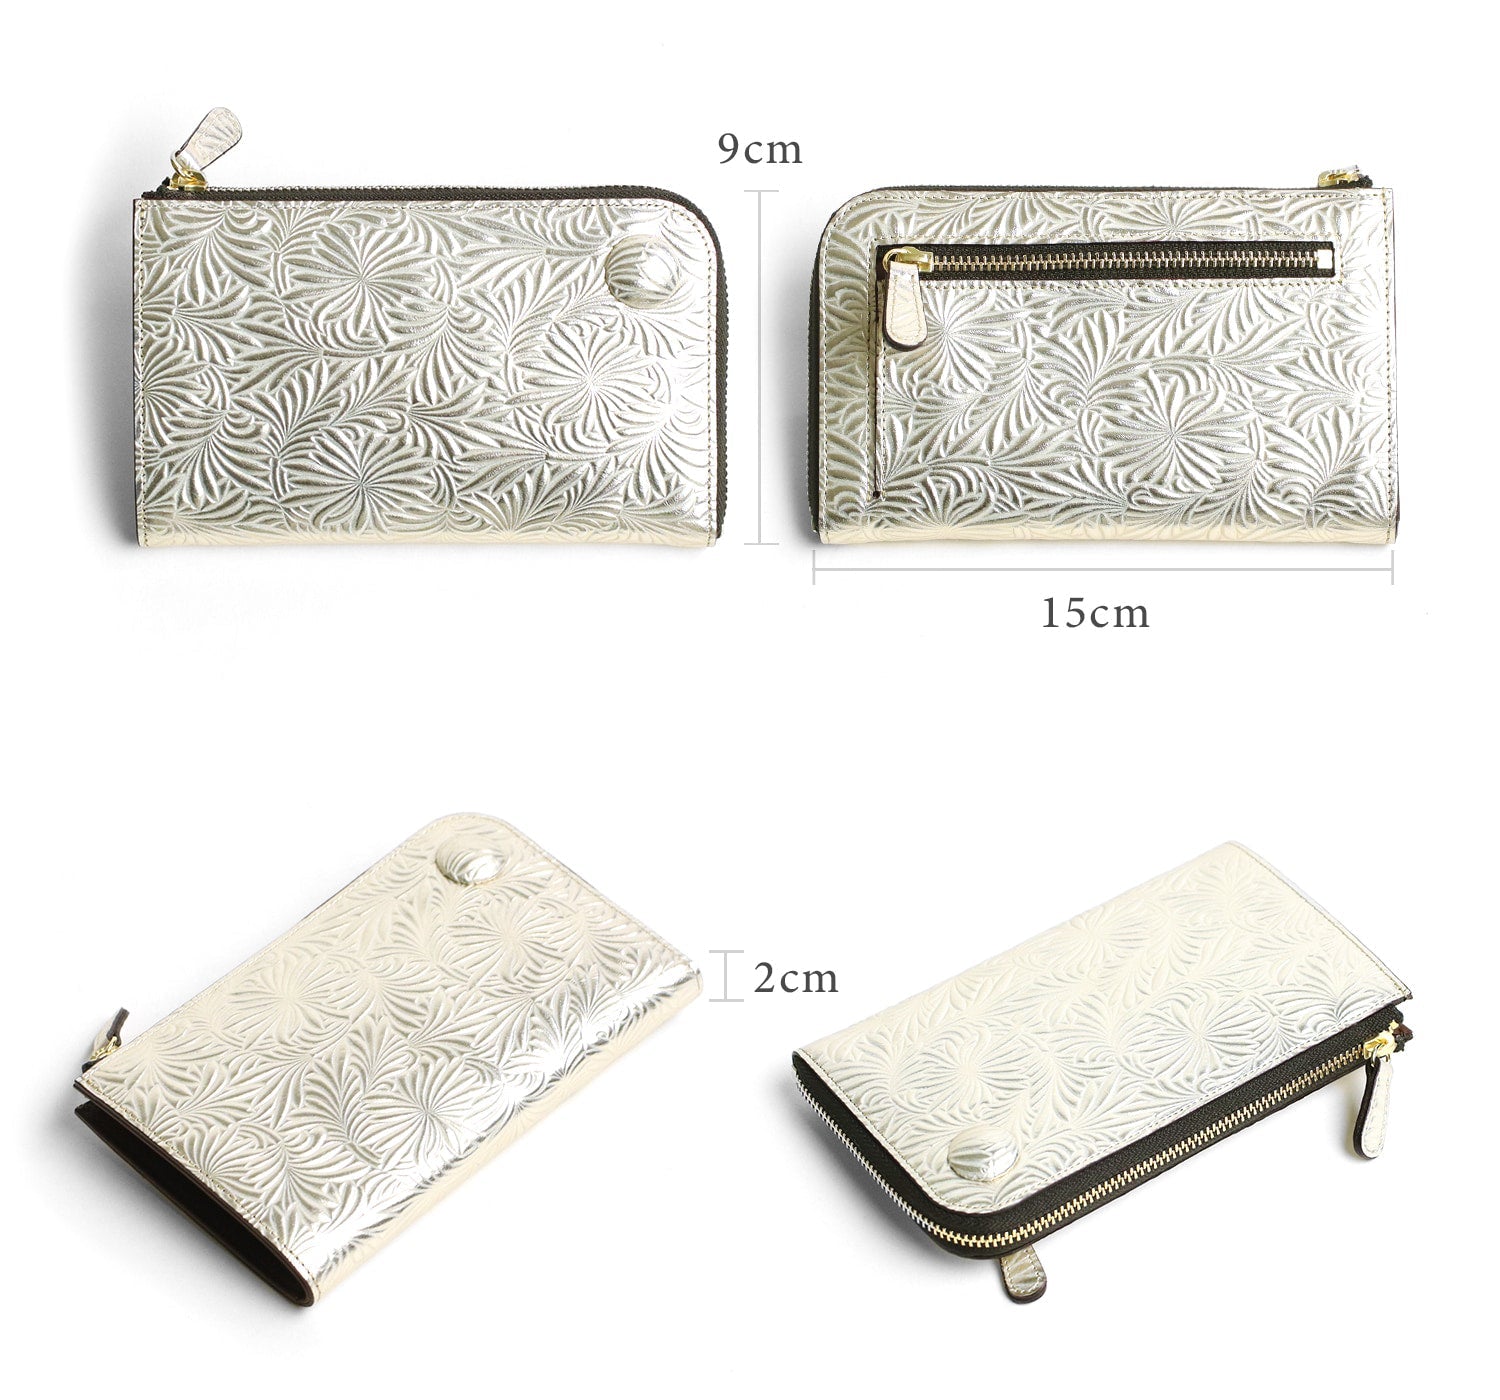 Neutral Gray NP061 Beautiful L zipper middle wallet with daisy embossed pattern